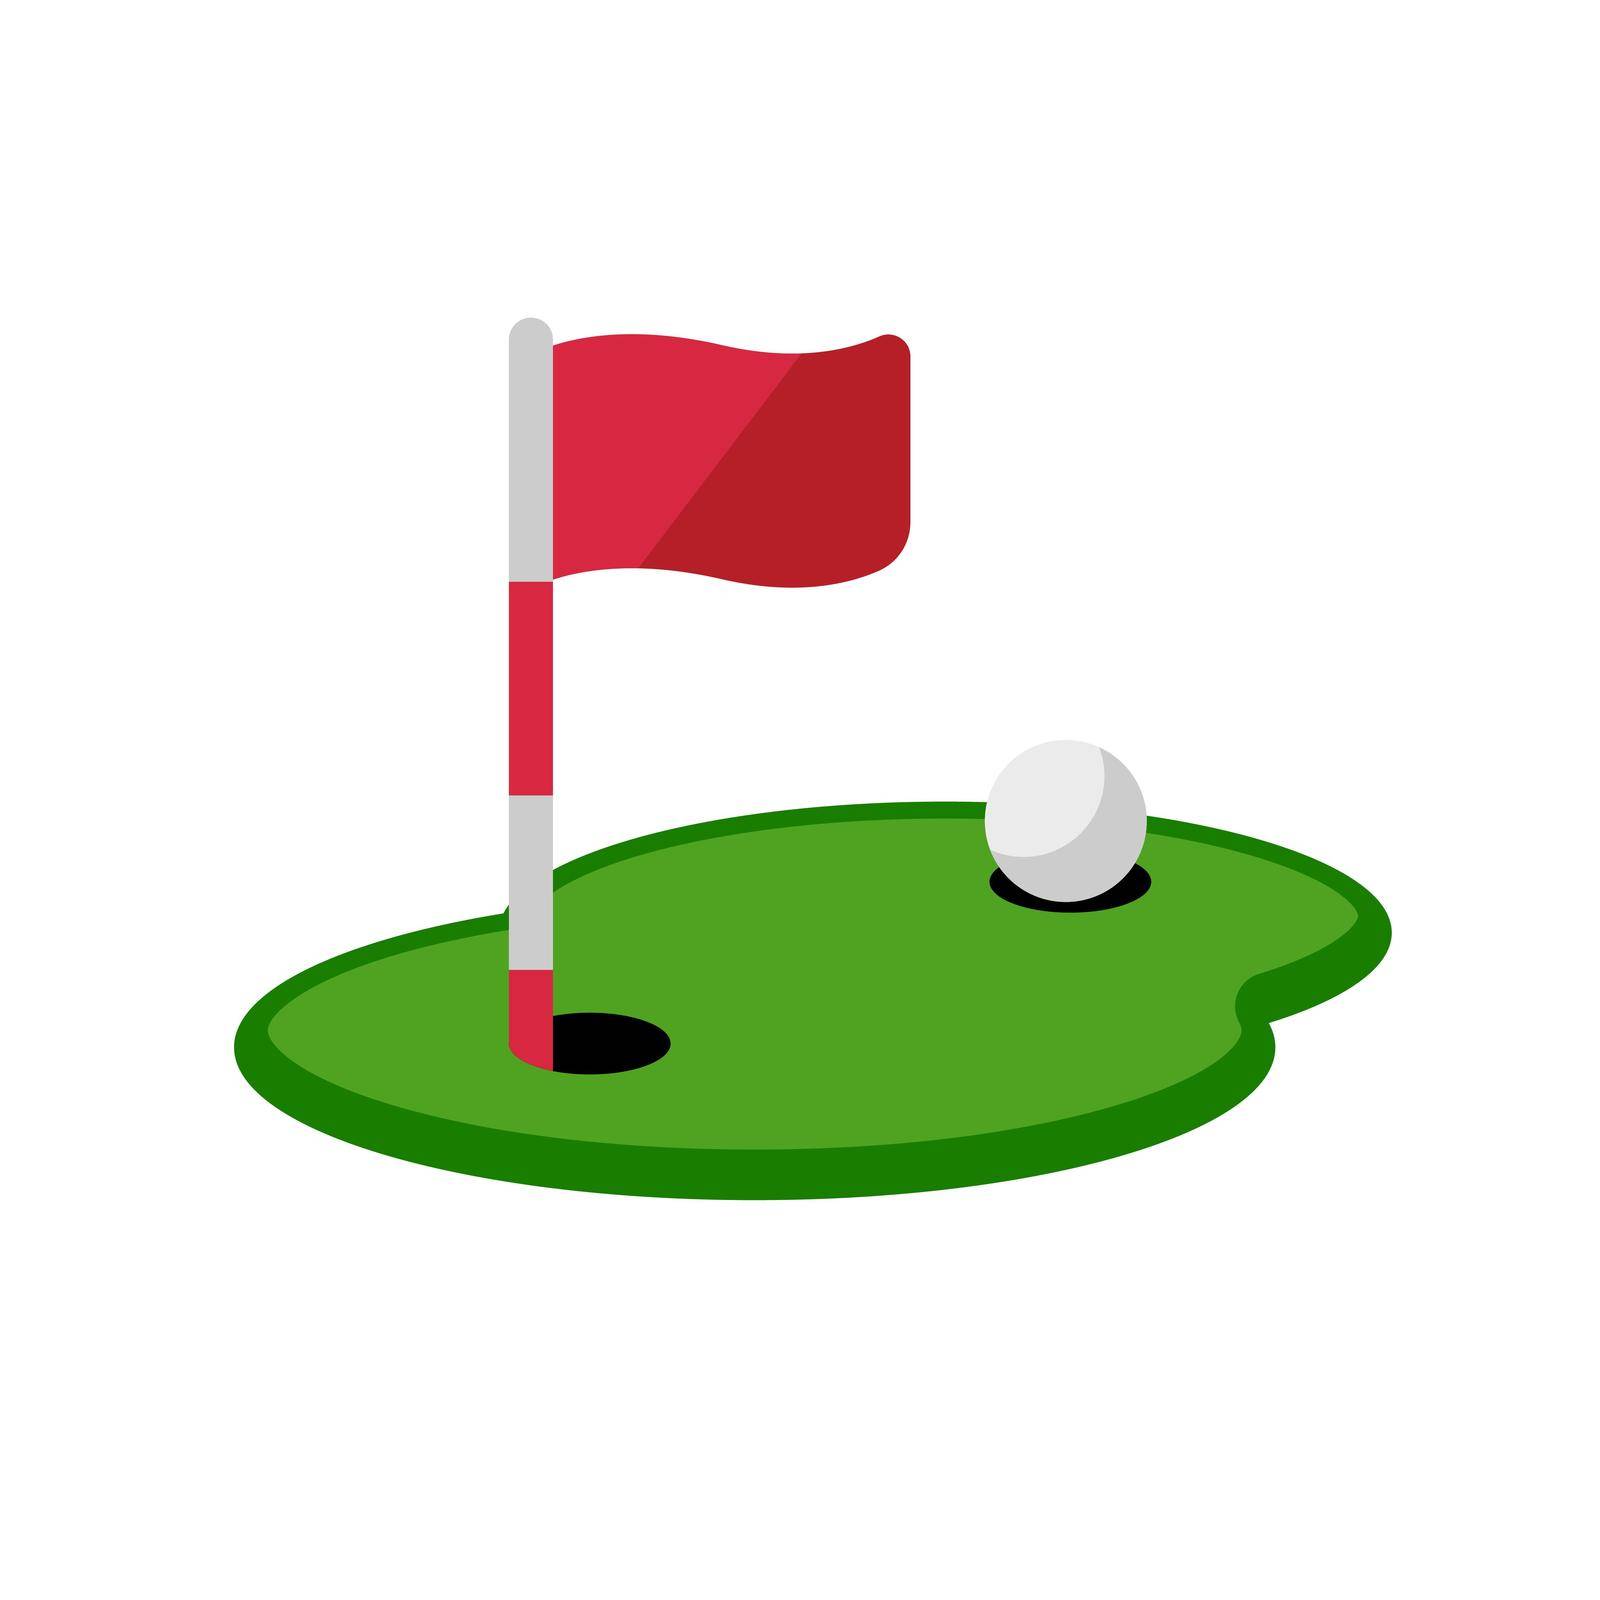 Golf course vector icon illustration by barks